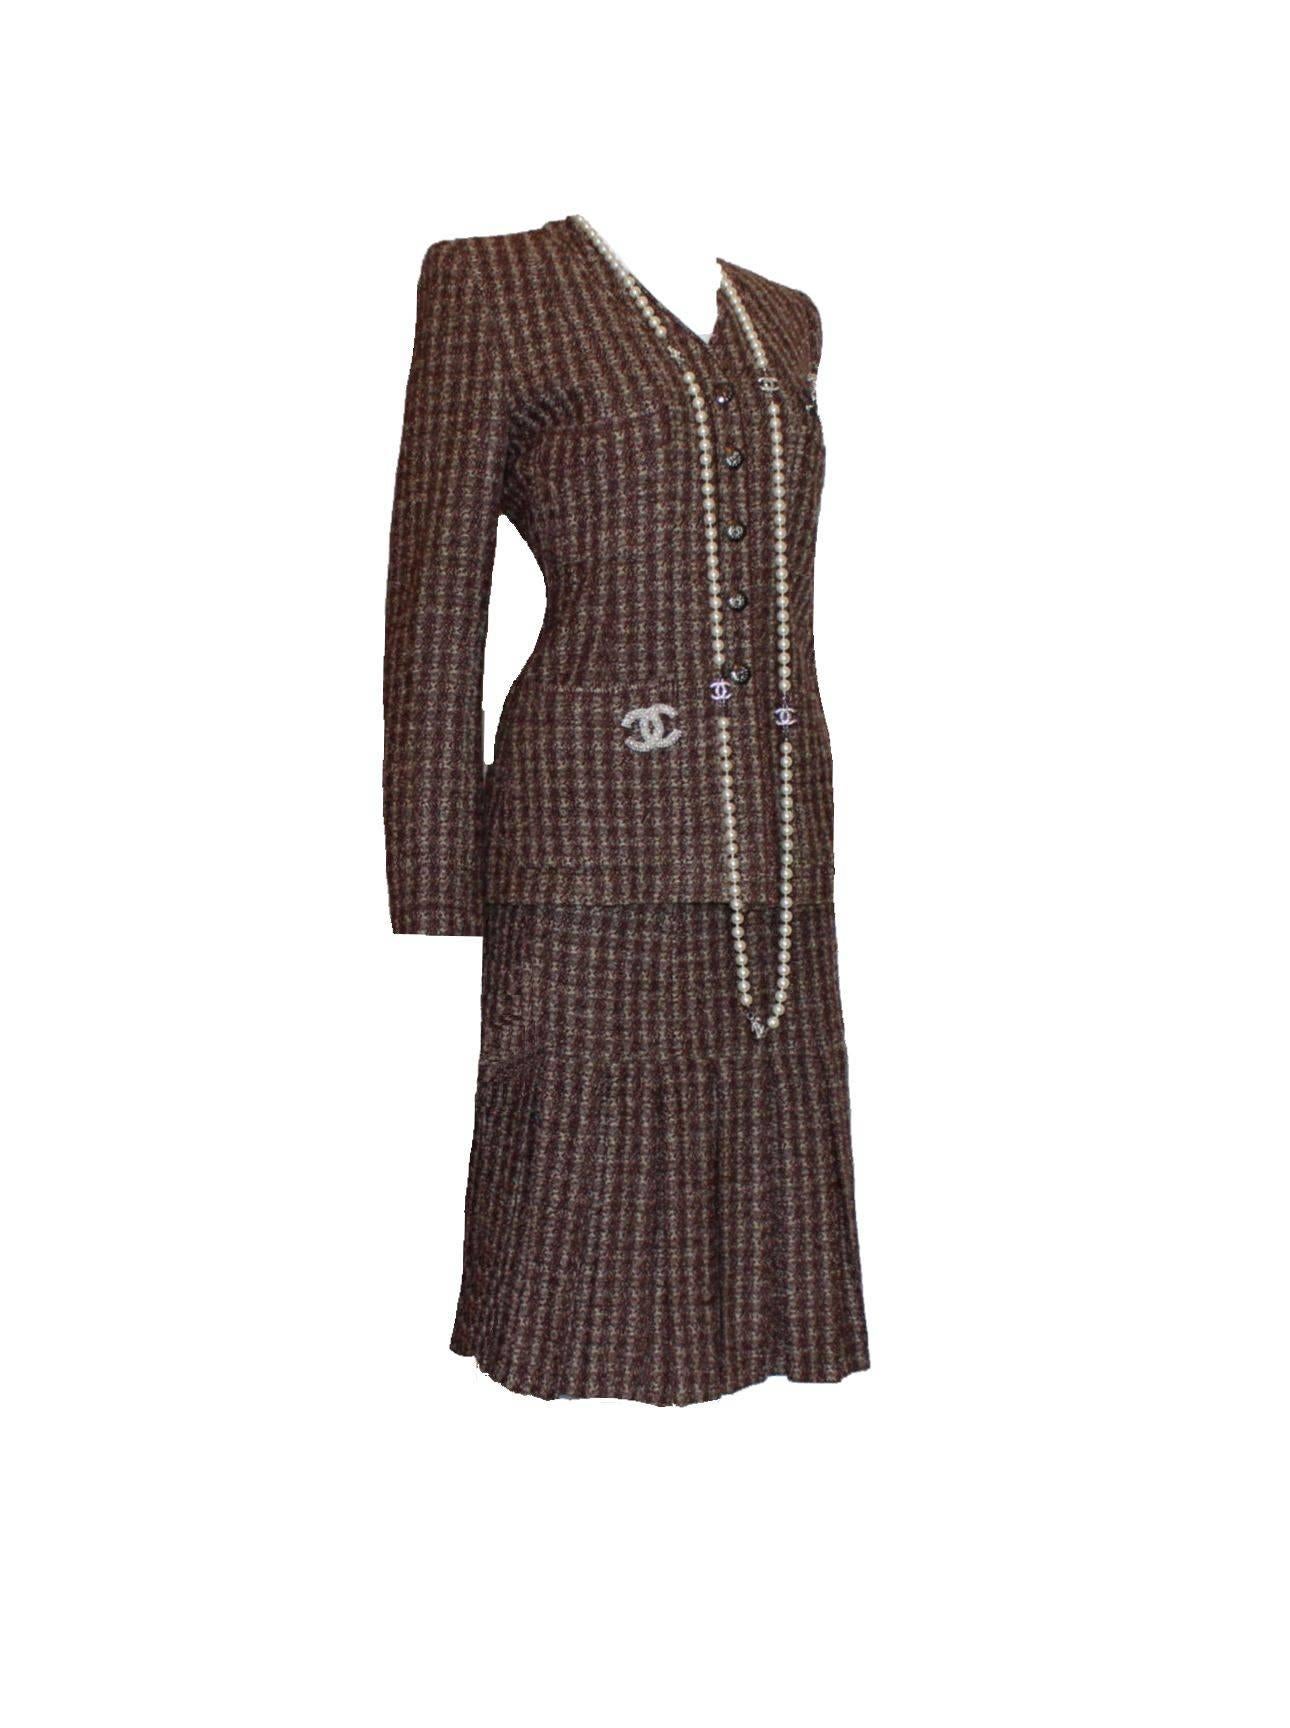 GORGEOUS TIMELESS CLASSIC

CHANEL TWEED SKIRT SUIT

A TRUE CHANEL PIECE THAT SHOULD BE IN EVERY WOMAN'S WARDROBE

A REMAKE OF COCO CHANEL'S SIGNATURE TWEED SUITS OF THE 1930S WITH A MODERN TWIST

DETAILS:
Beautiful CHANEL tweed jacket with matching